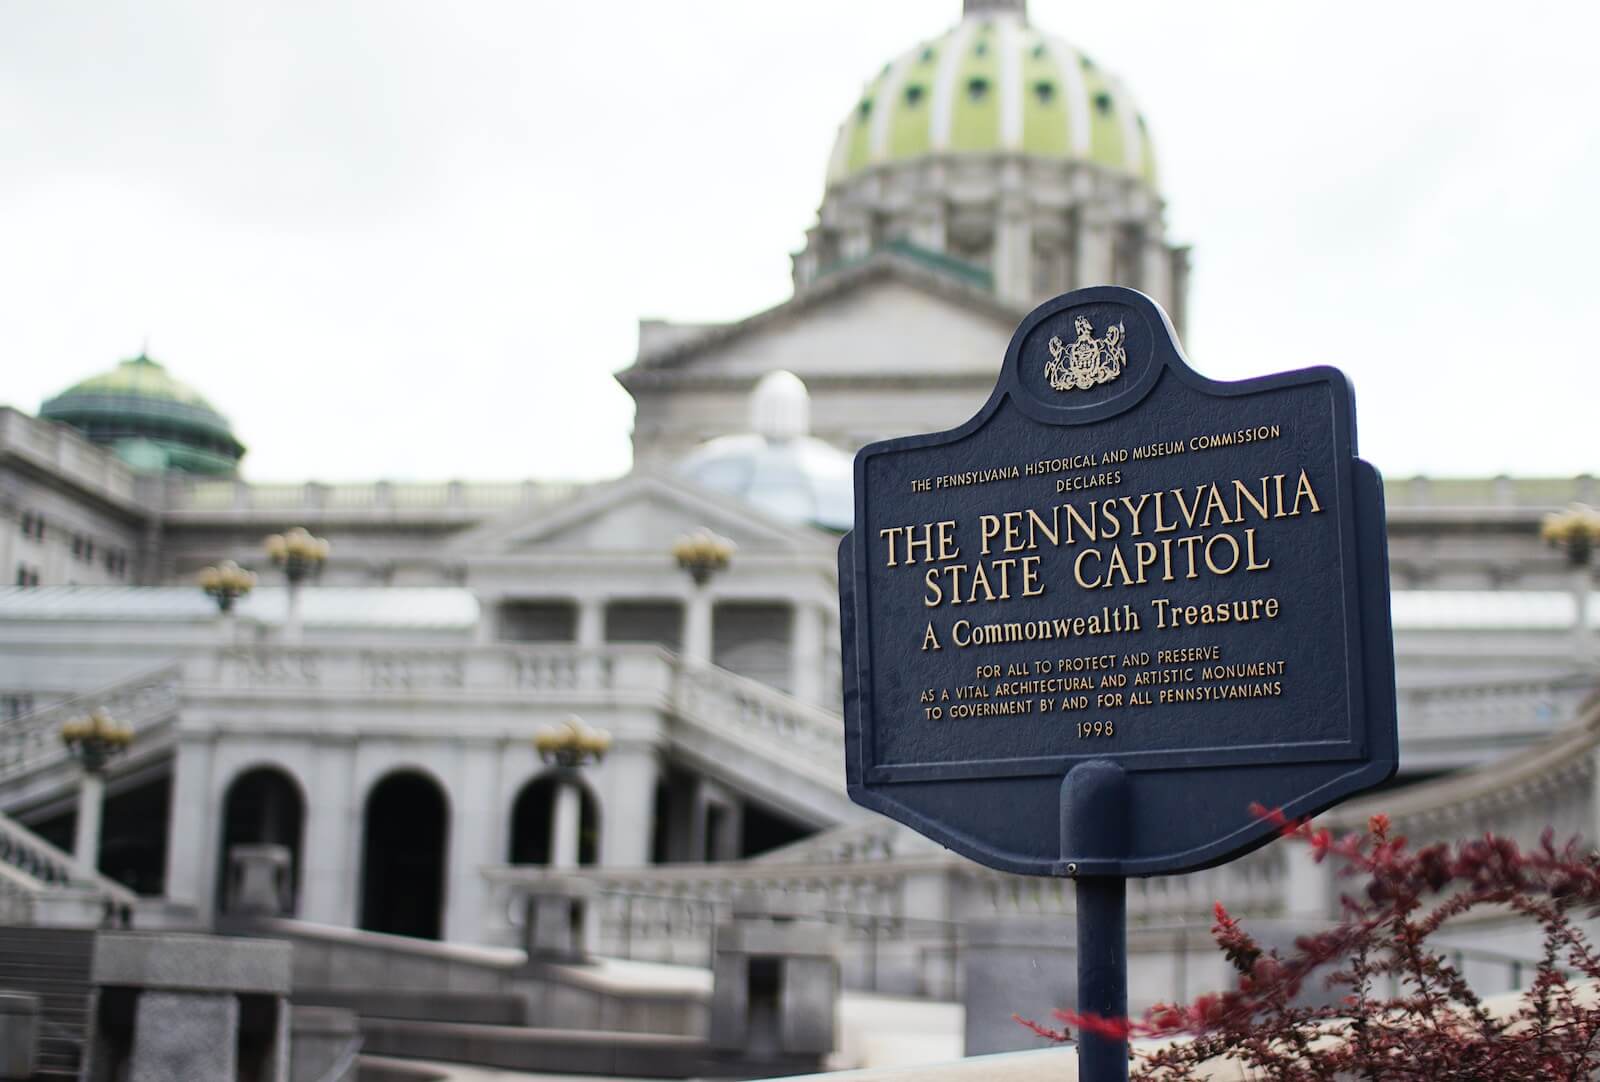 The Pennsylvania State Capitol signage and building in Harrisburg